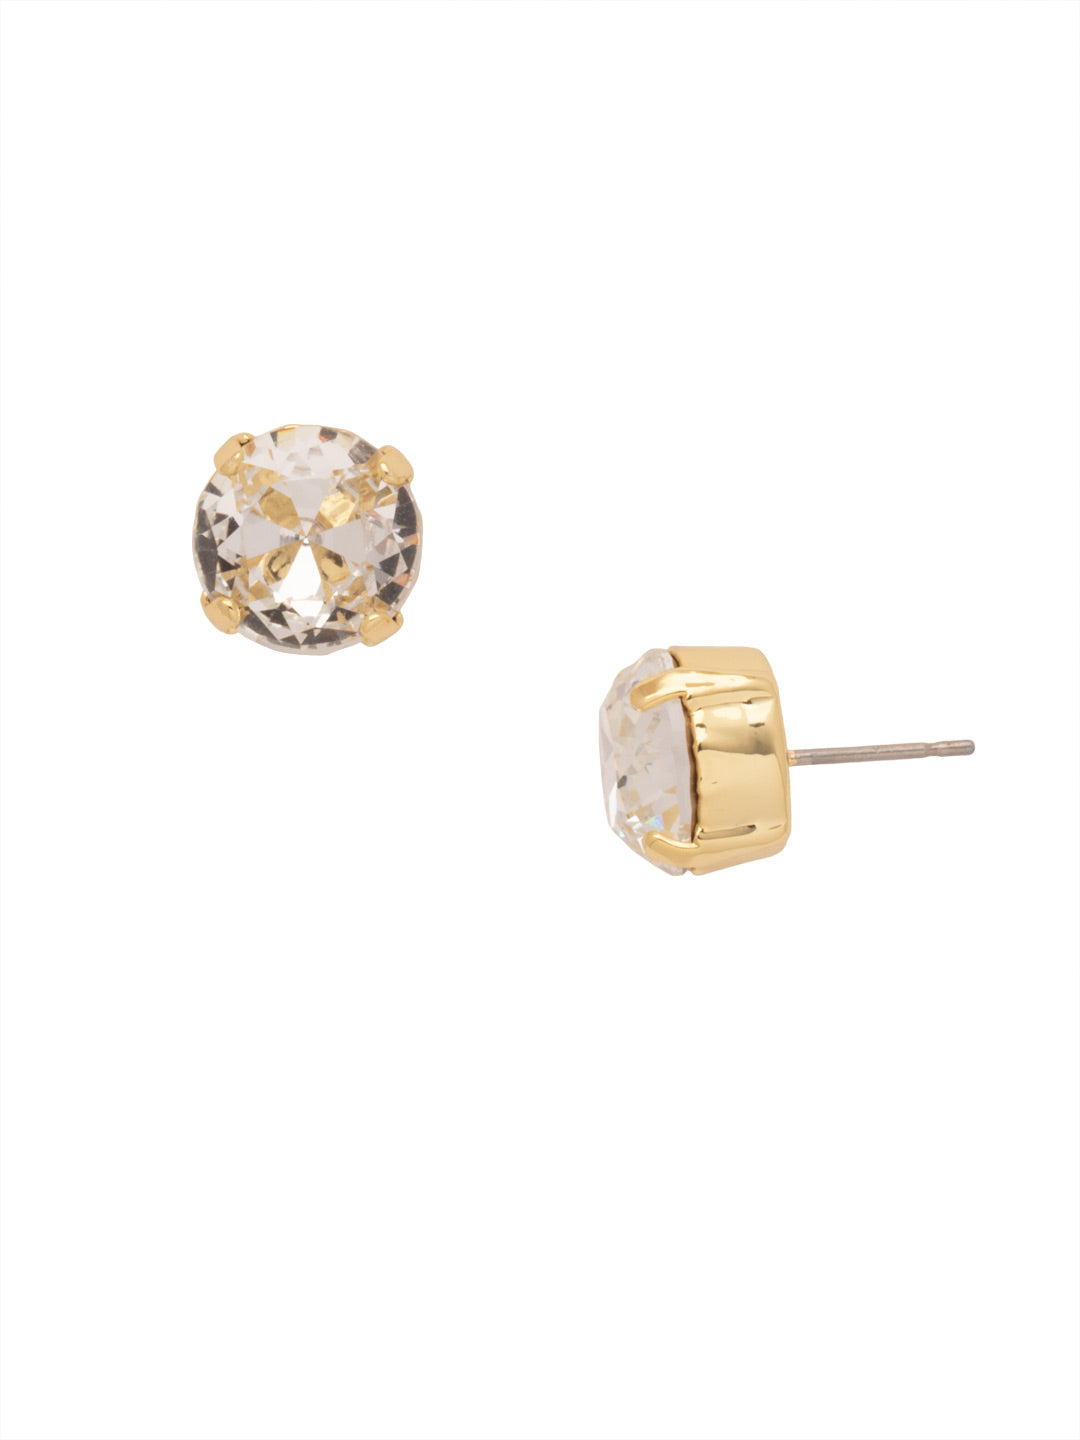 London Stud Earrings - 8EA14BGCRY - <p>Everyone needs a great pair of studs. Add some classic sparkle to any occasion with these stud earrings. Need help picking a stud? <a href="https://www.sorrelli.com/blogs/sisterhood/round-stud-earrings-101-a-rundown-of-sizes-styles-and-sparkle">Check out our size guide!</a>. From Sorrelli's Crystal collection in our Bright Gold-tone finish.</p>